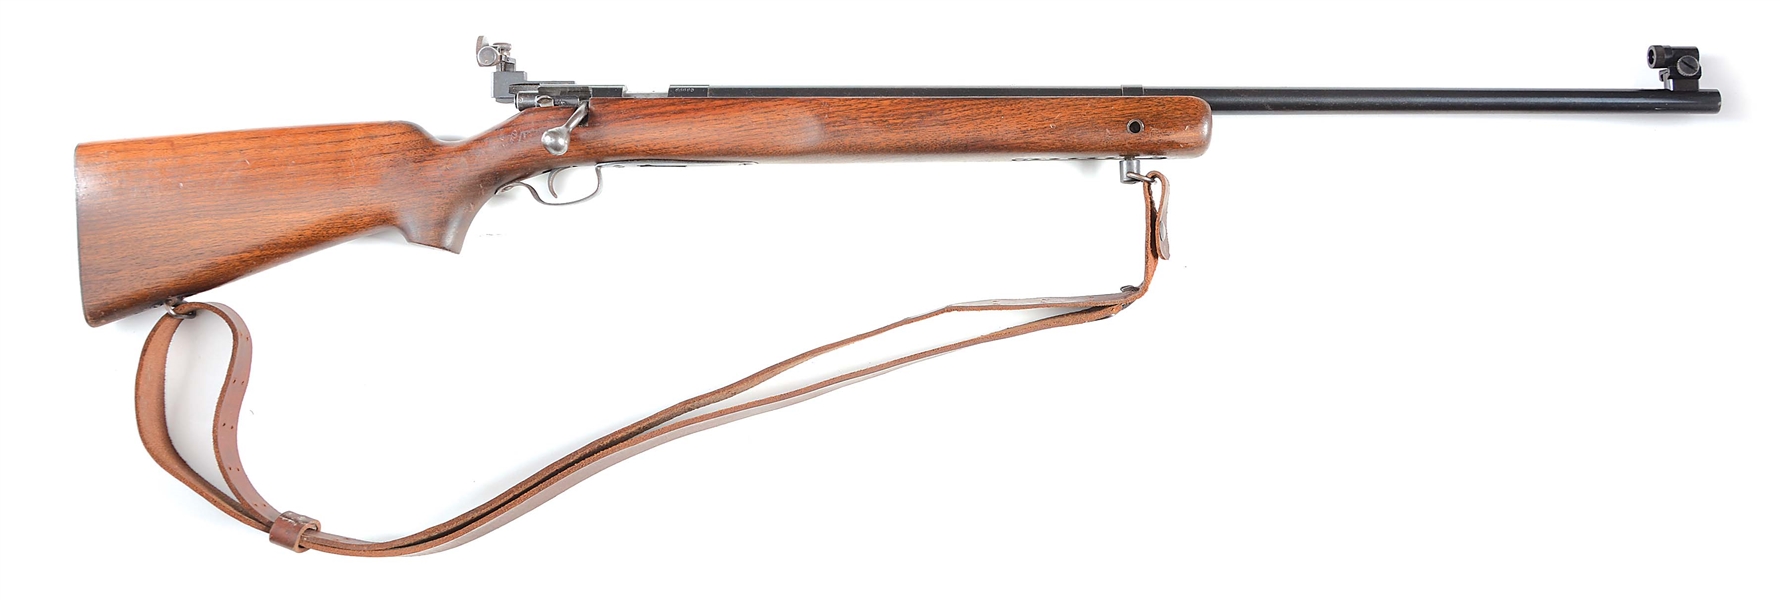 (C) WINCHESTER MODEL 75 BOLT ACTION TARGET RIFLE (1956).